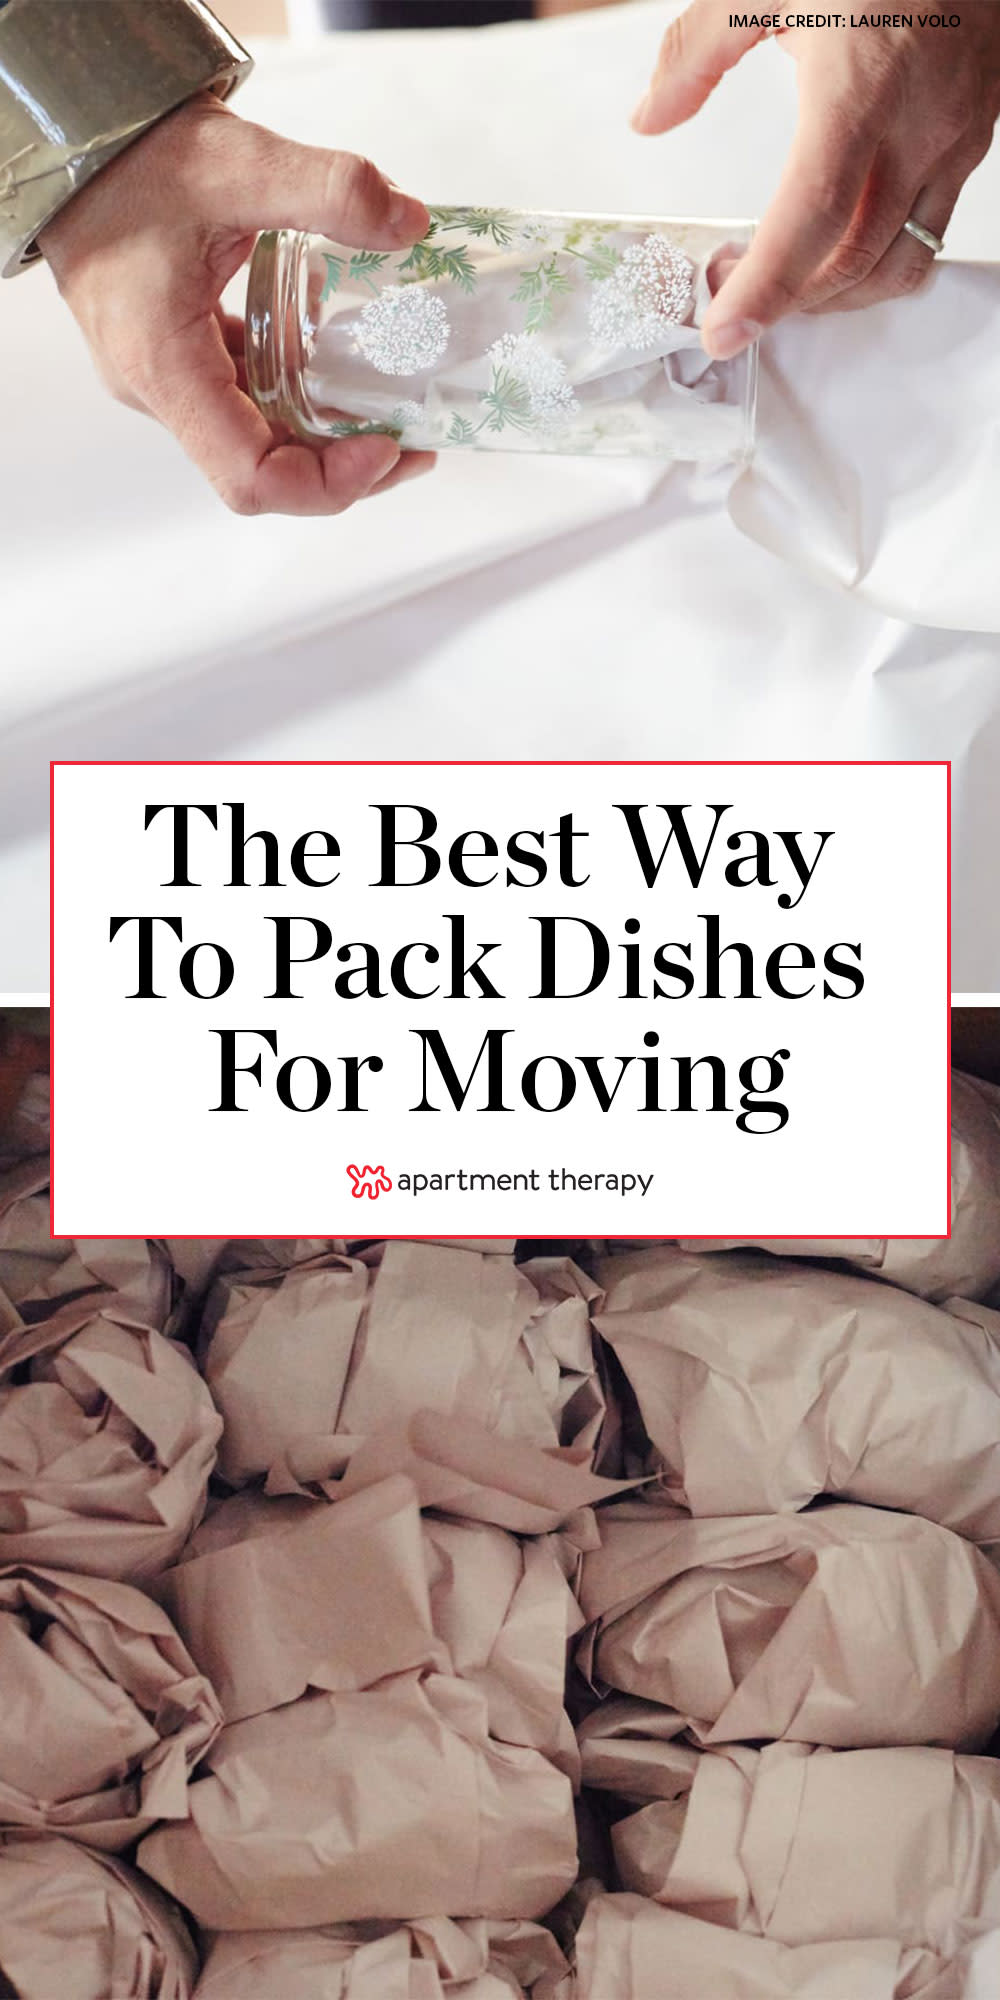 How To Pack Dishes For Moving